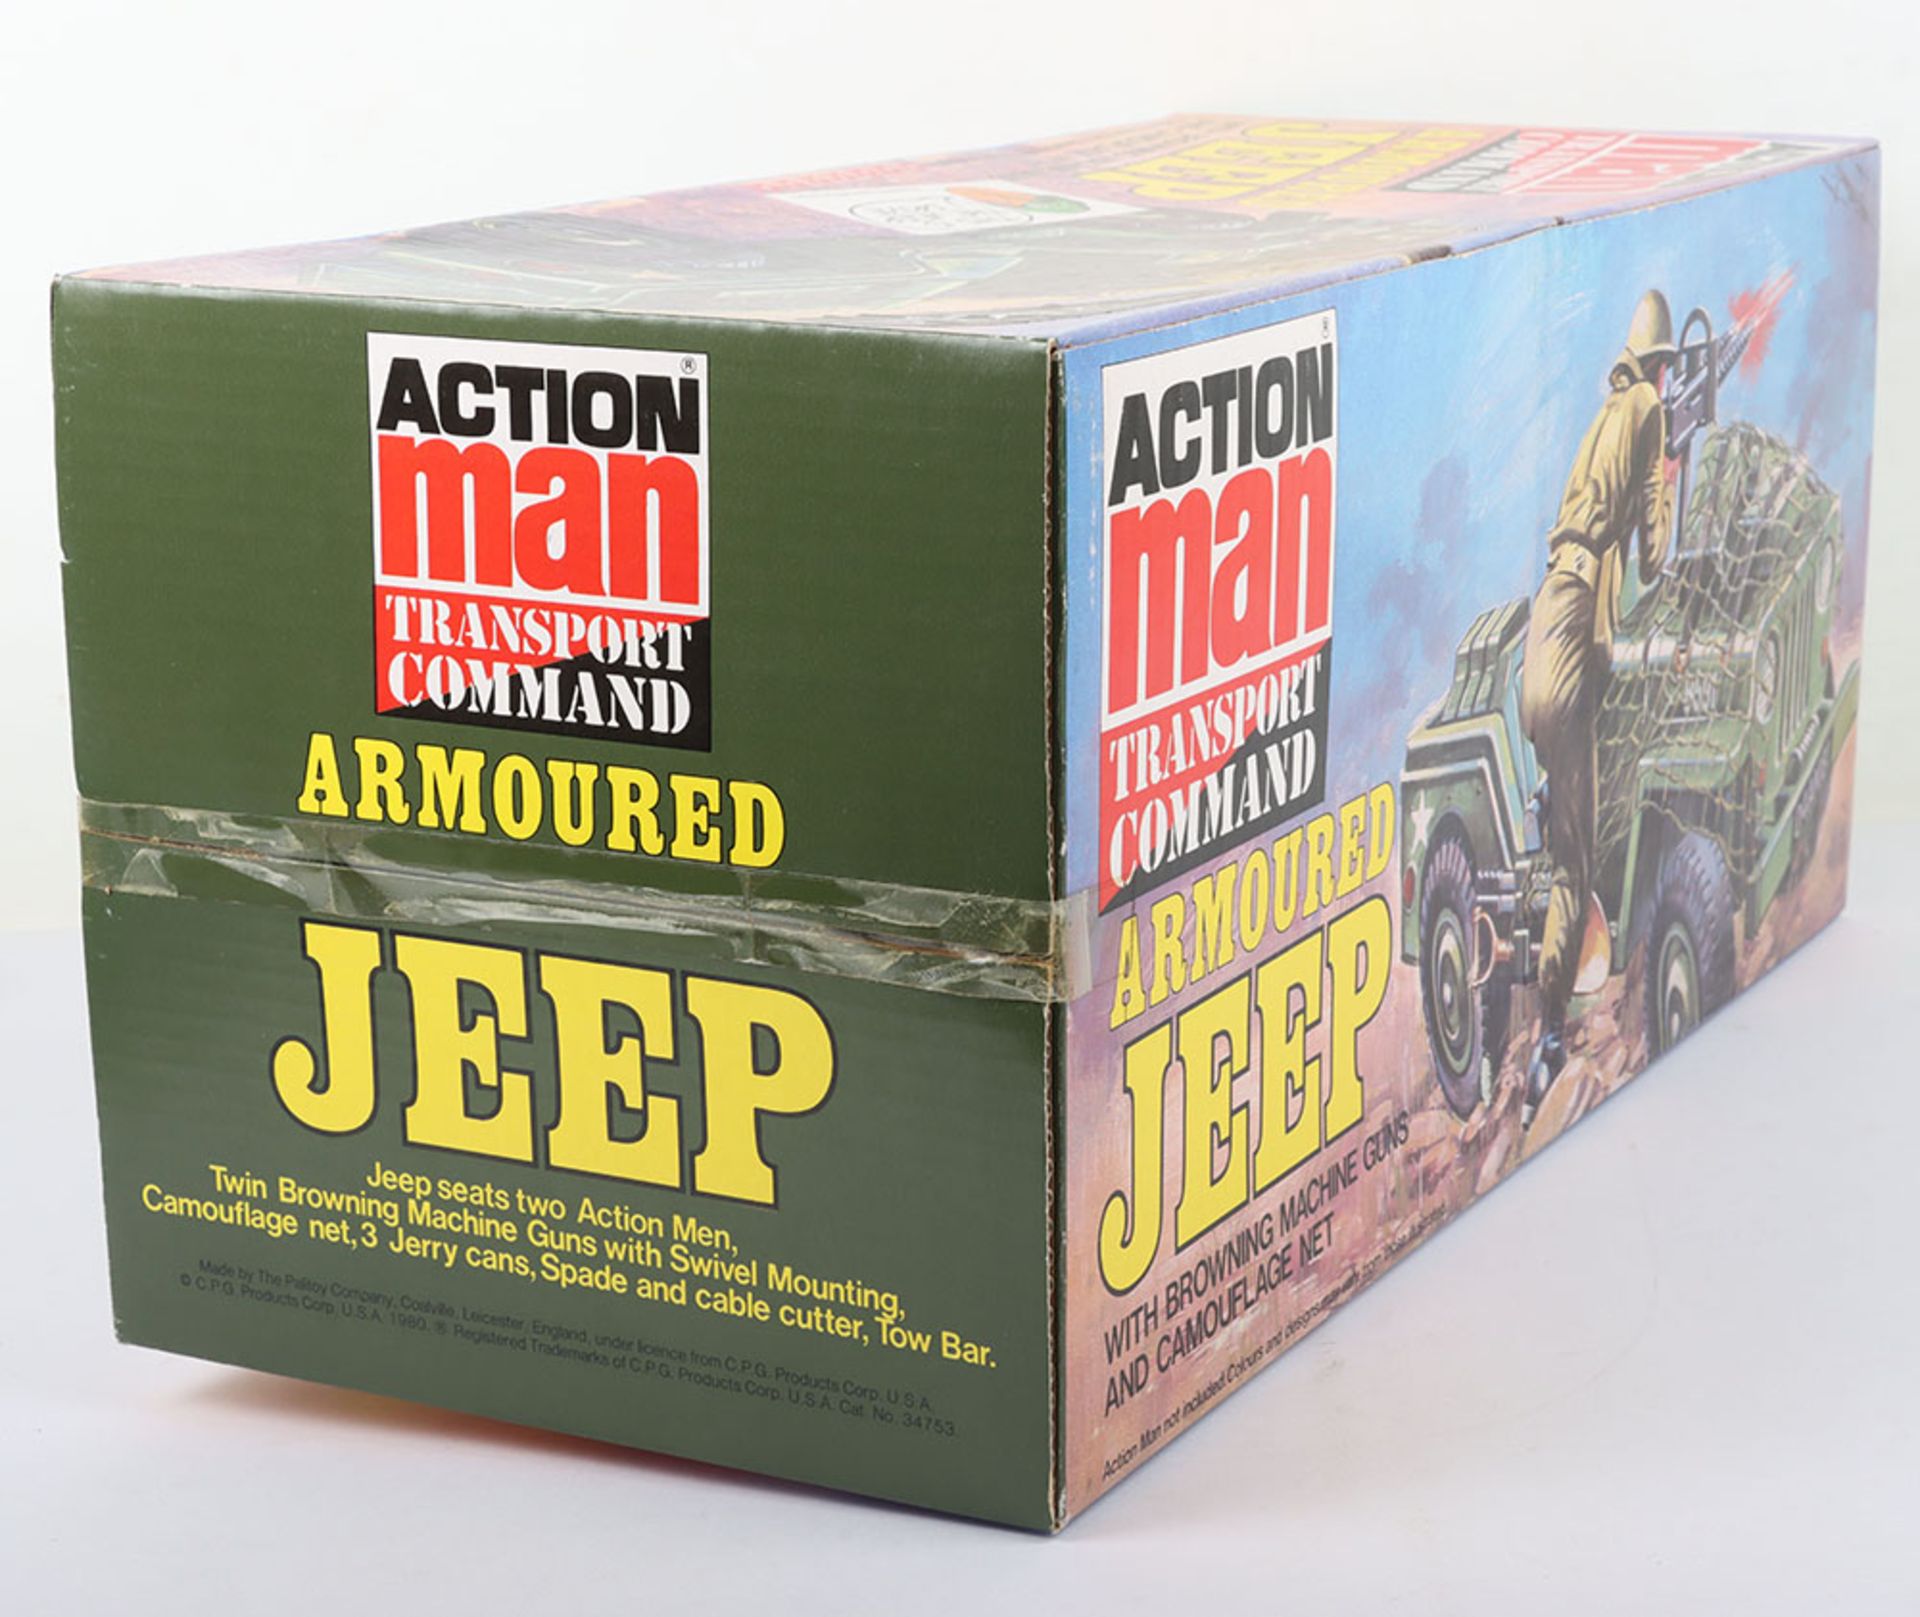 Palitoy Action Man Transport Command Armoured Jeep - Image 3 of 5